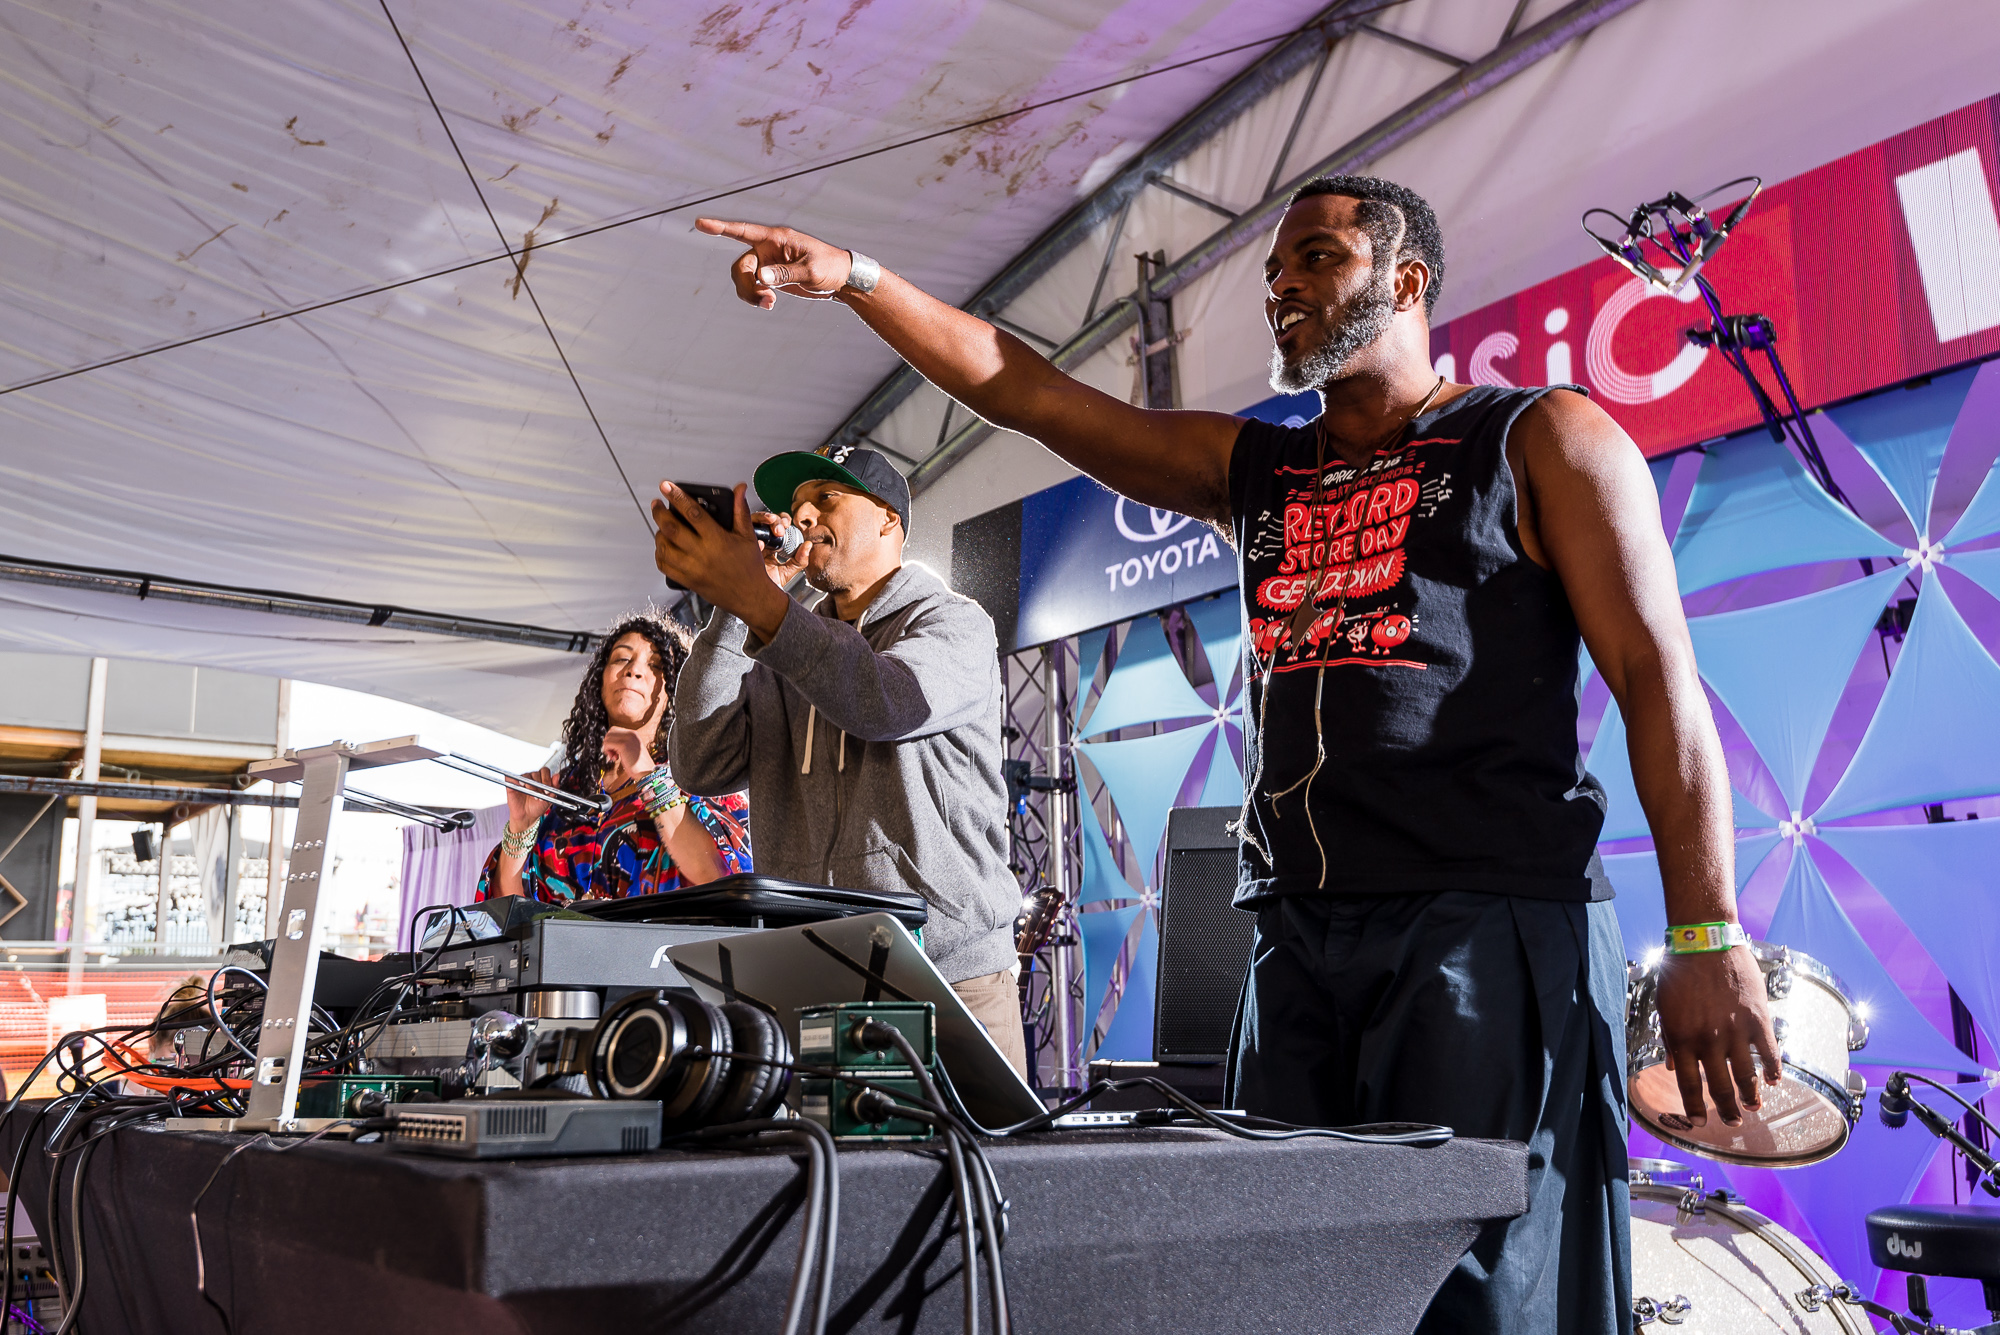 Sasquatch! 2016: Day 1 at Toyota Music Den with Rudimental, Digable Planets, and More